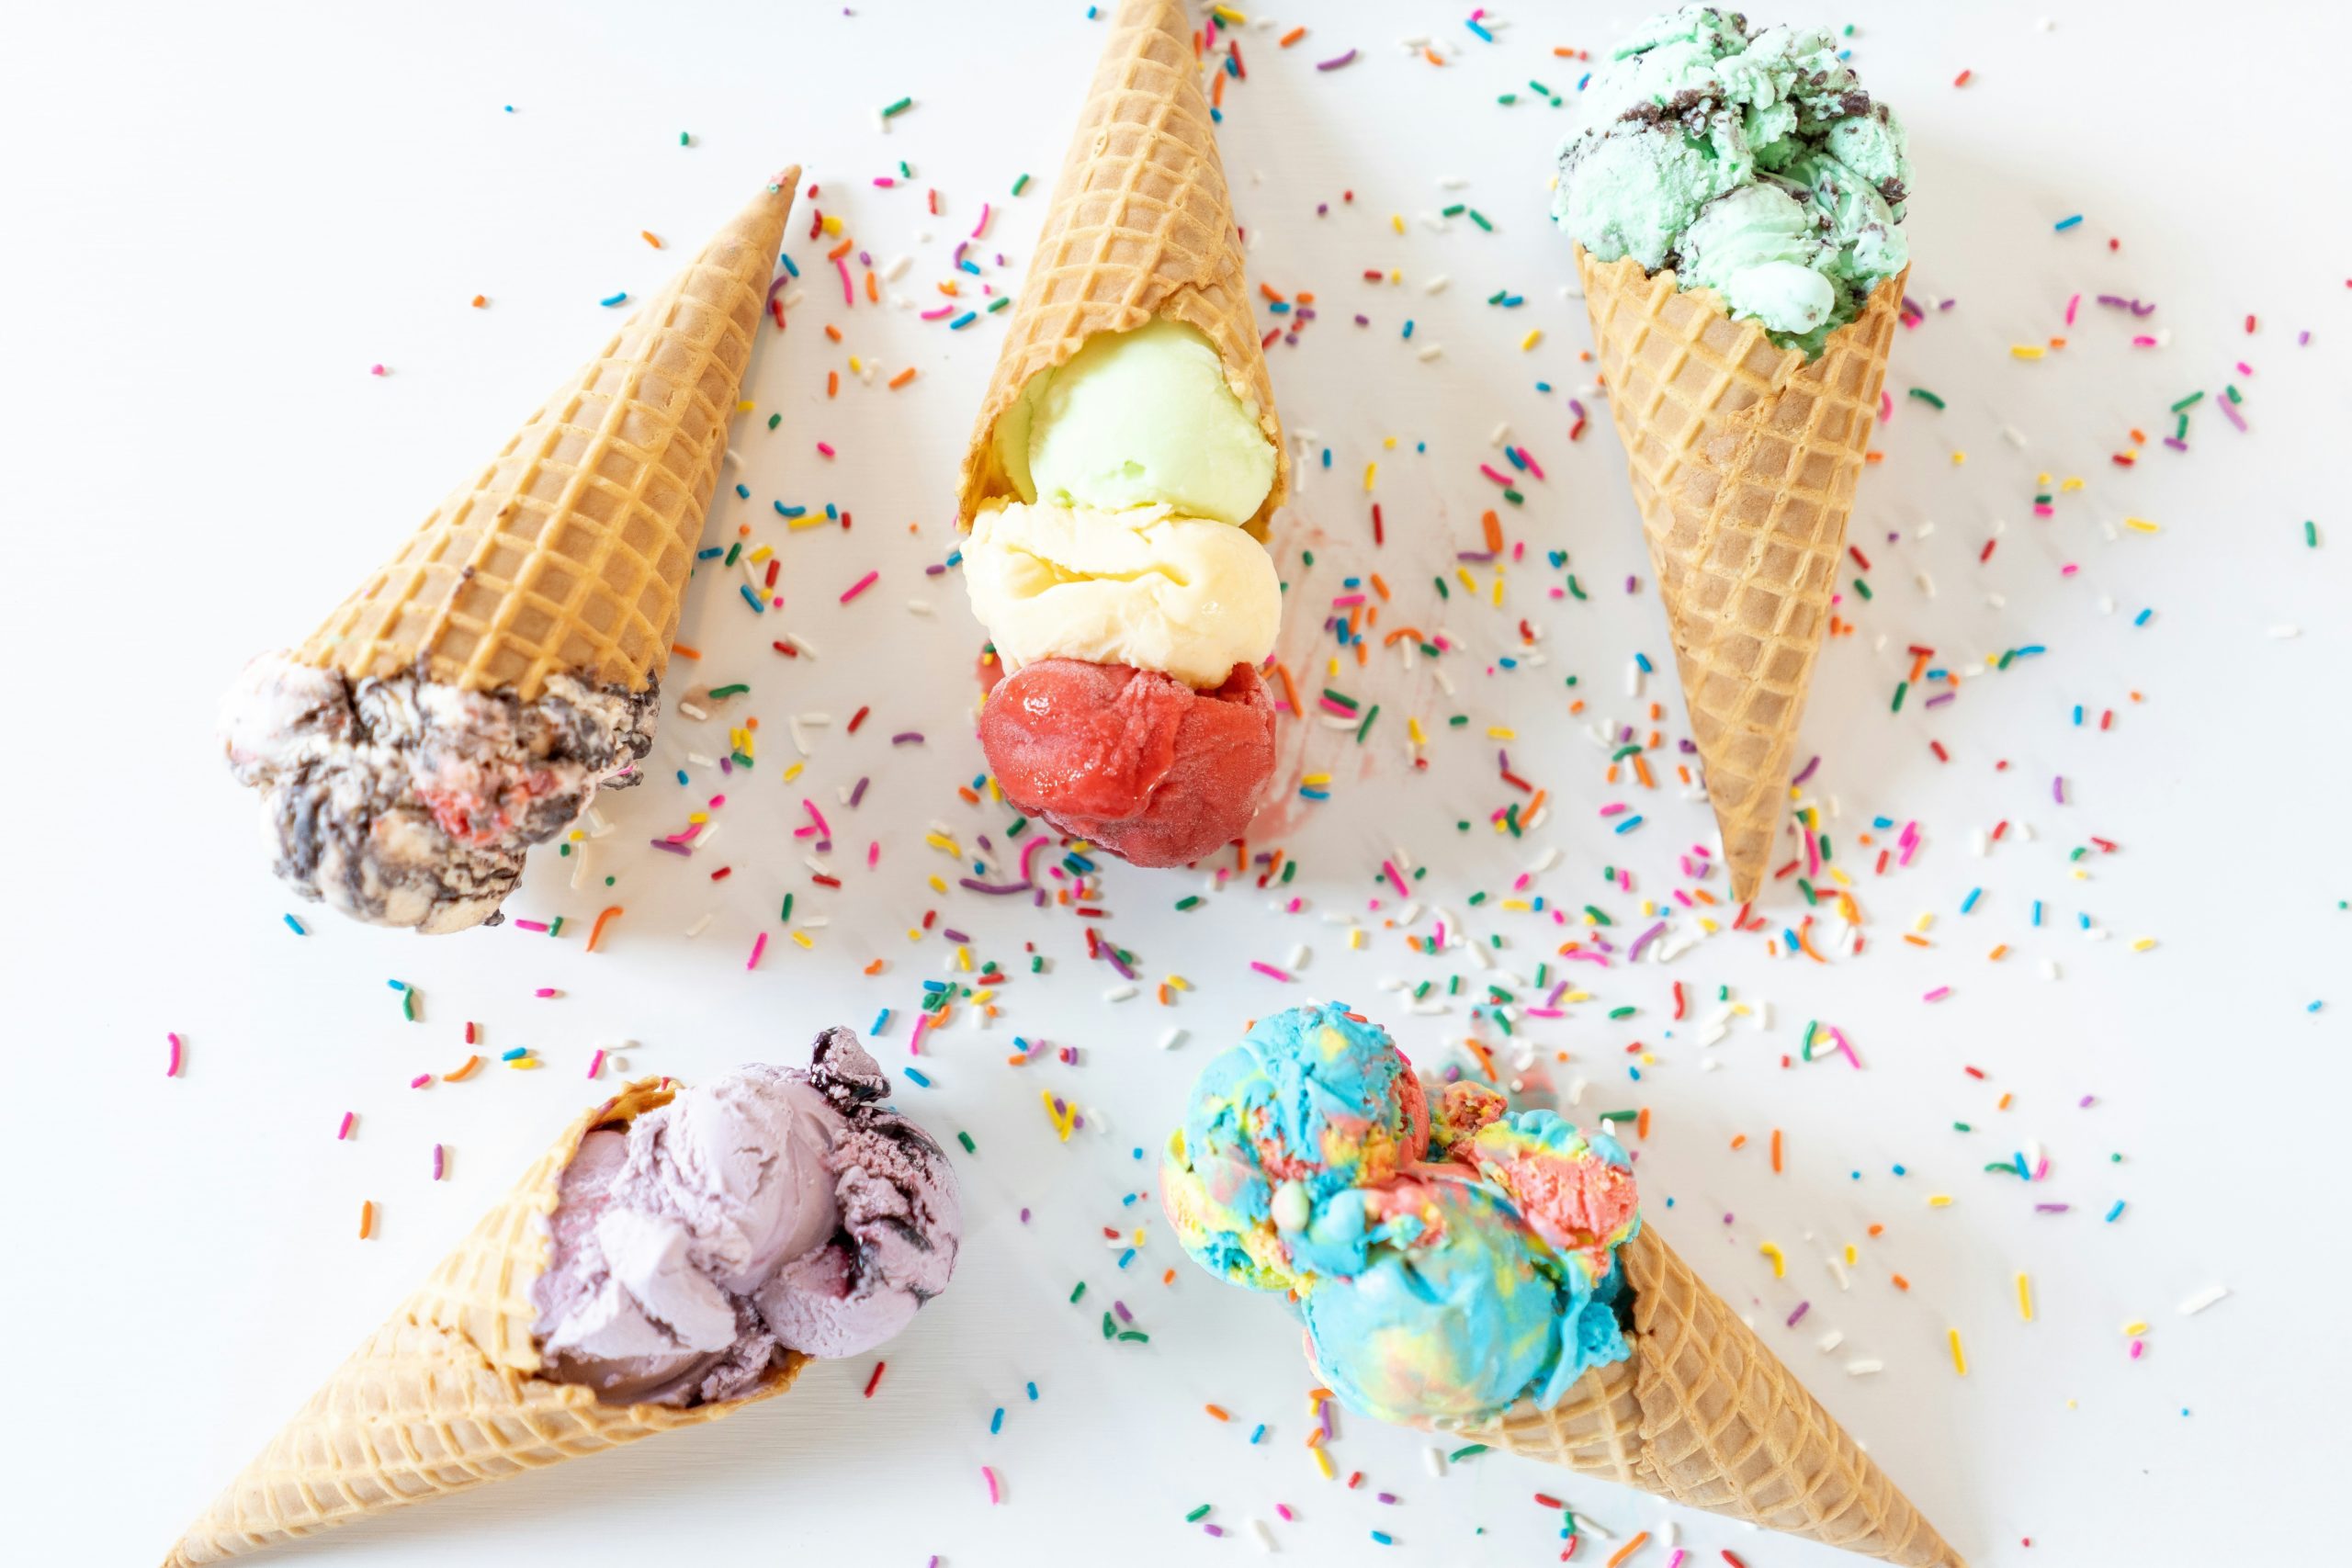 Beat the Heat: Best Locally Owned Spots Cold Treats in Cabot, AR